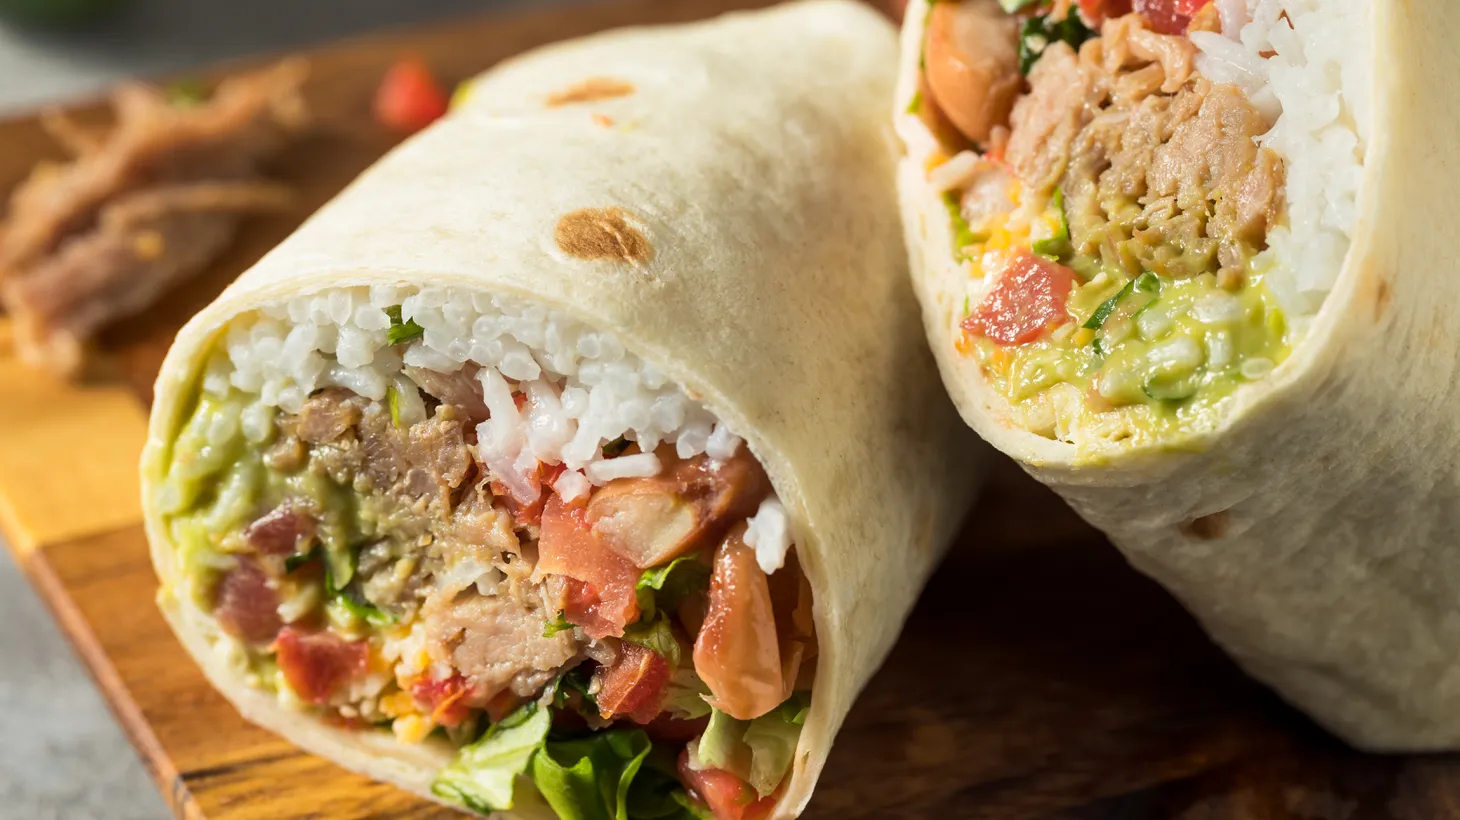 The great burrito rivalries between California’s major cities may never be resolved, but wherever you fall on the spectrum, they’re all pretty delicious.